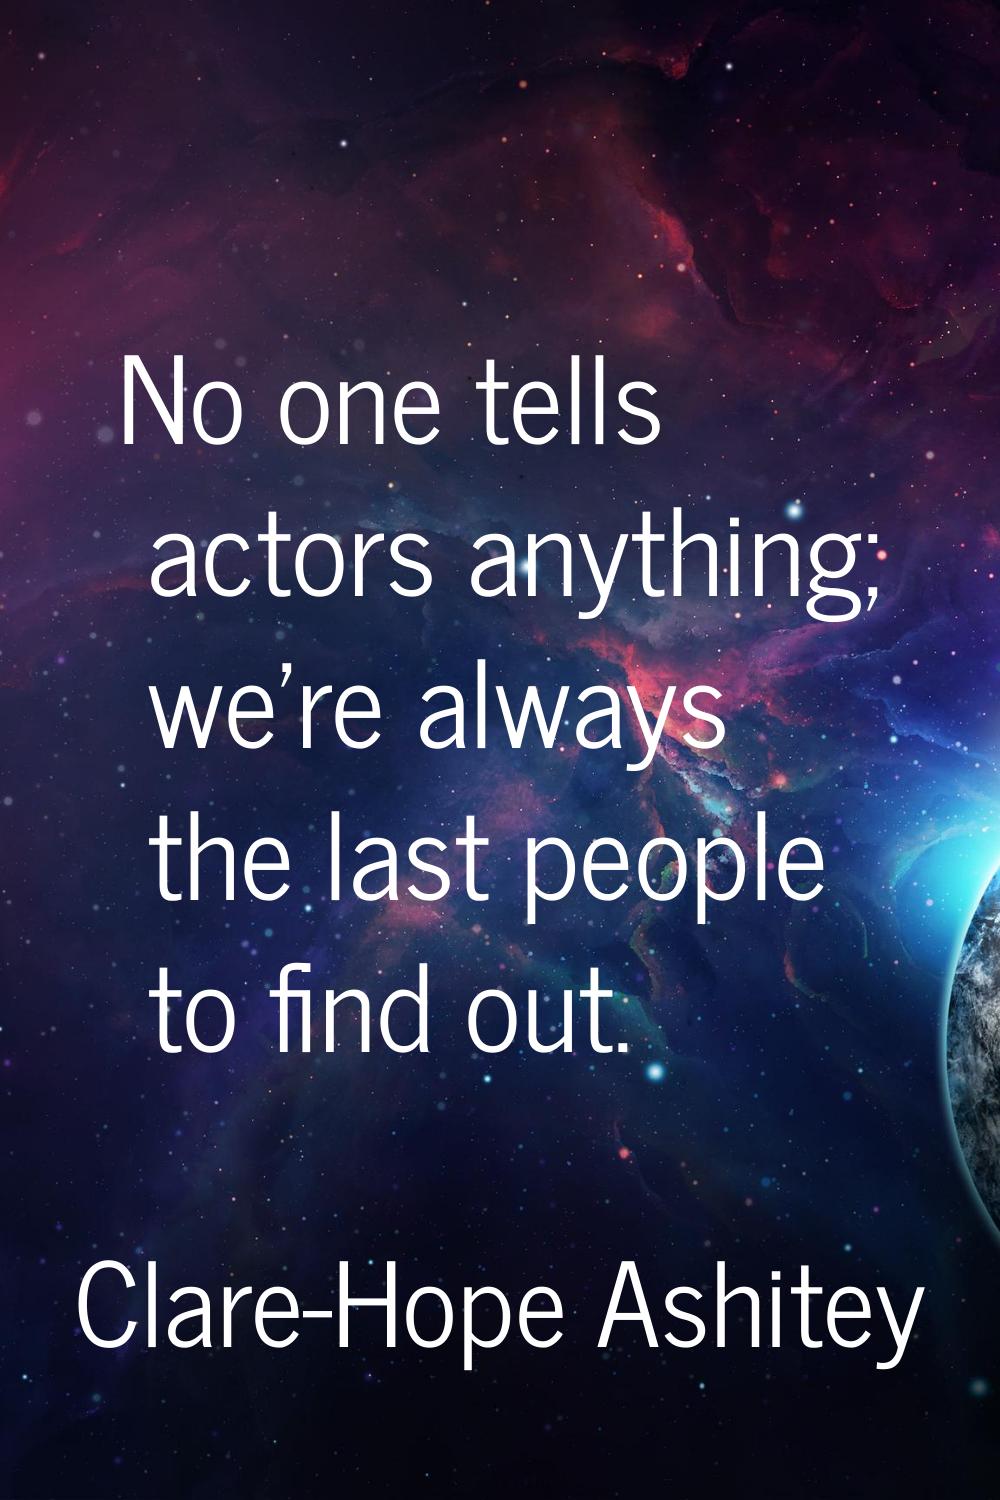 No one tells actors anything; we're always the last people to find out.